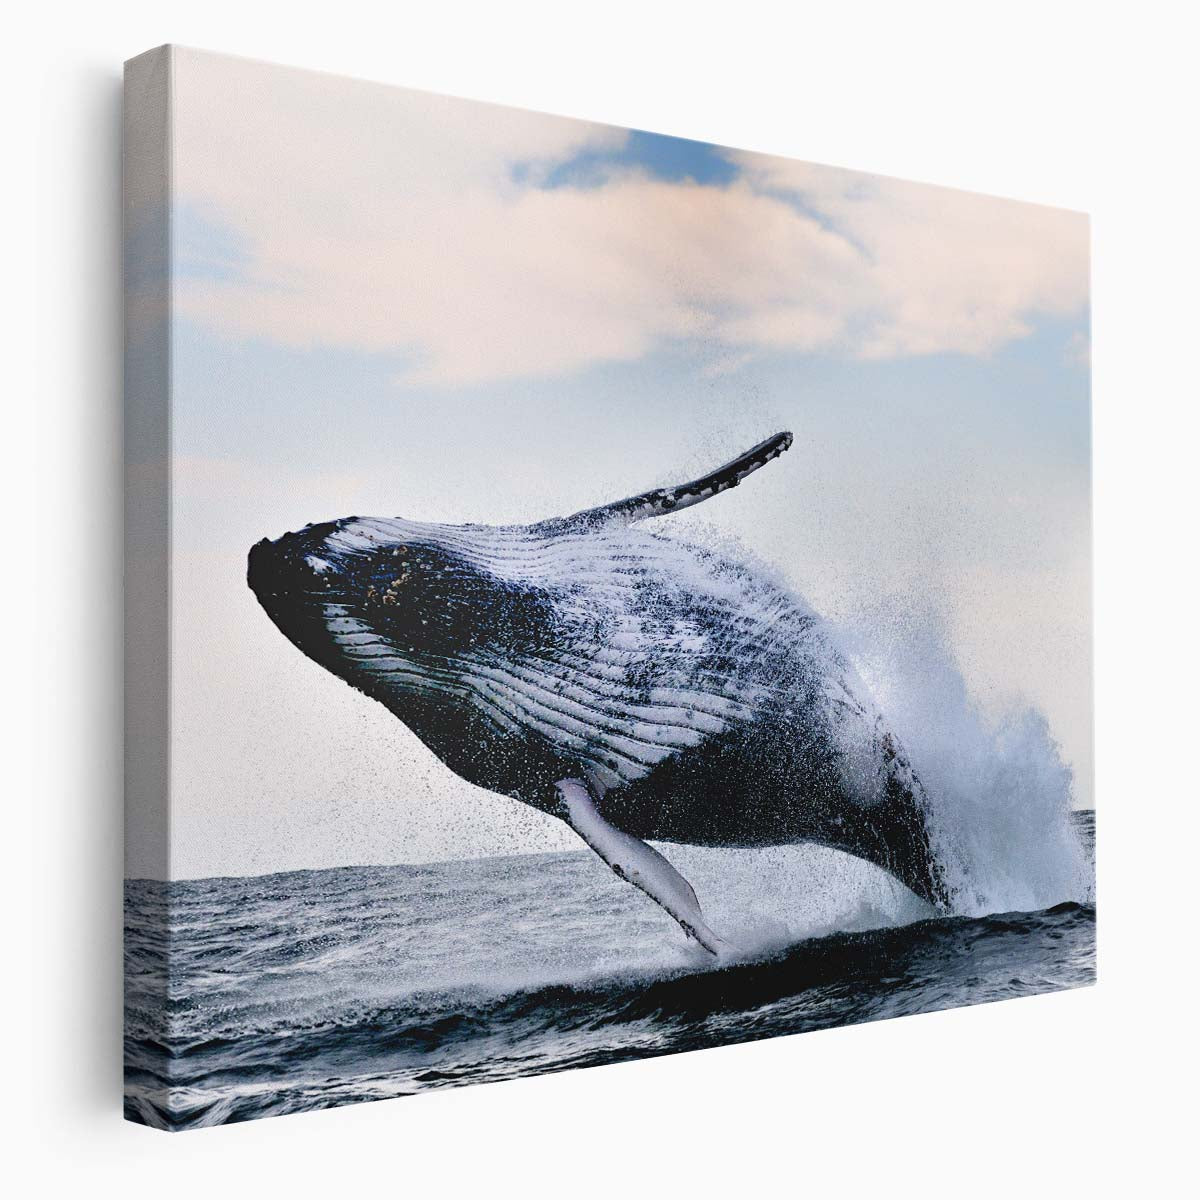 Majestic Humpback Whale Leap Ocean Seascape Wall Art by Luxuriance Designs. Made in USA.